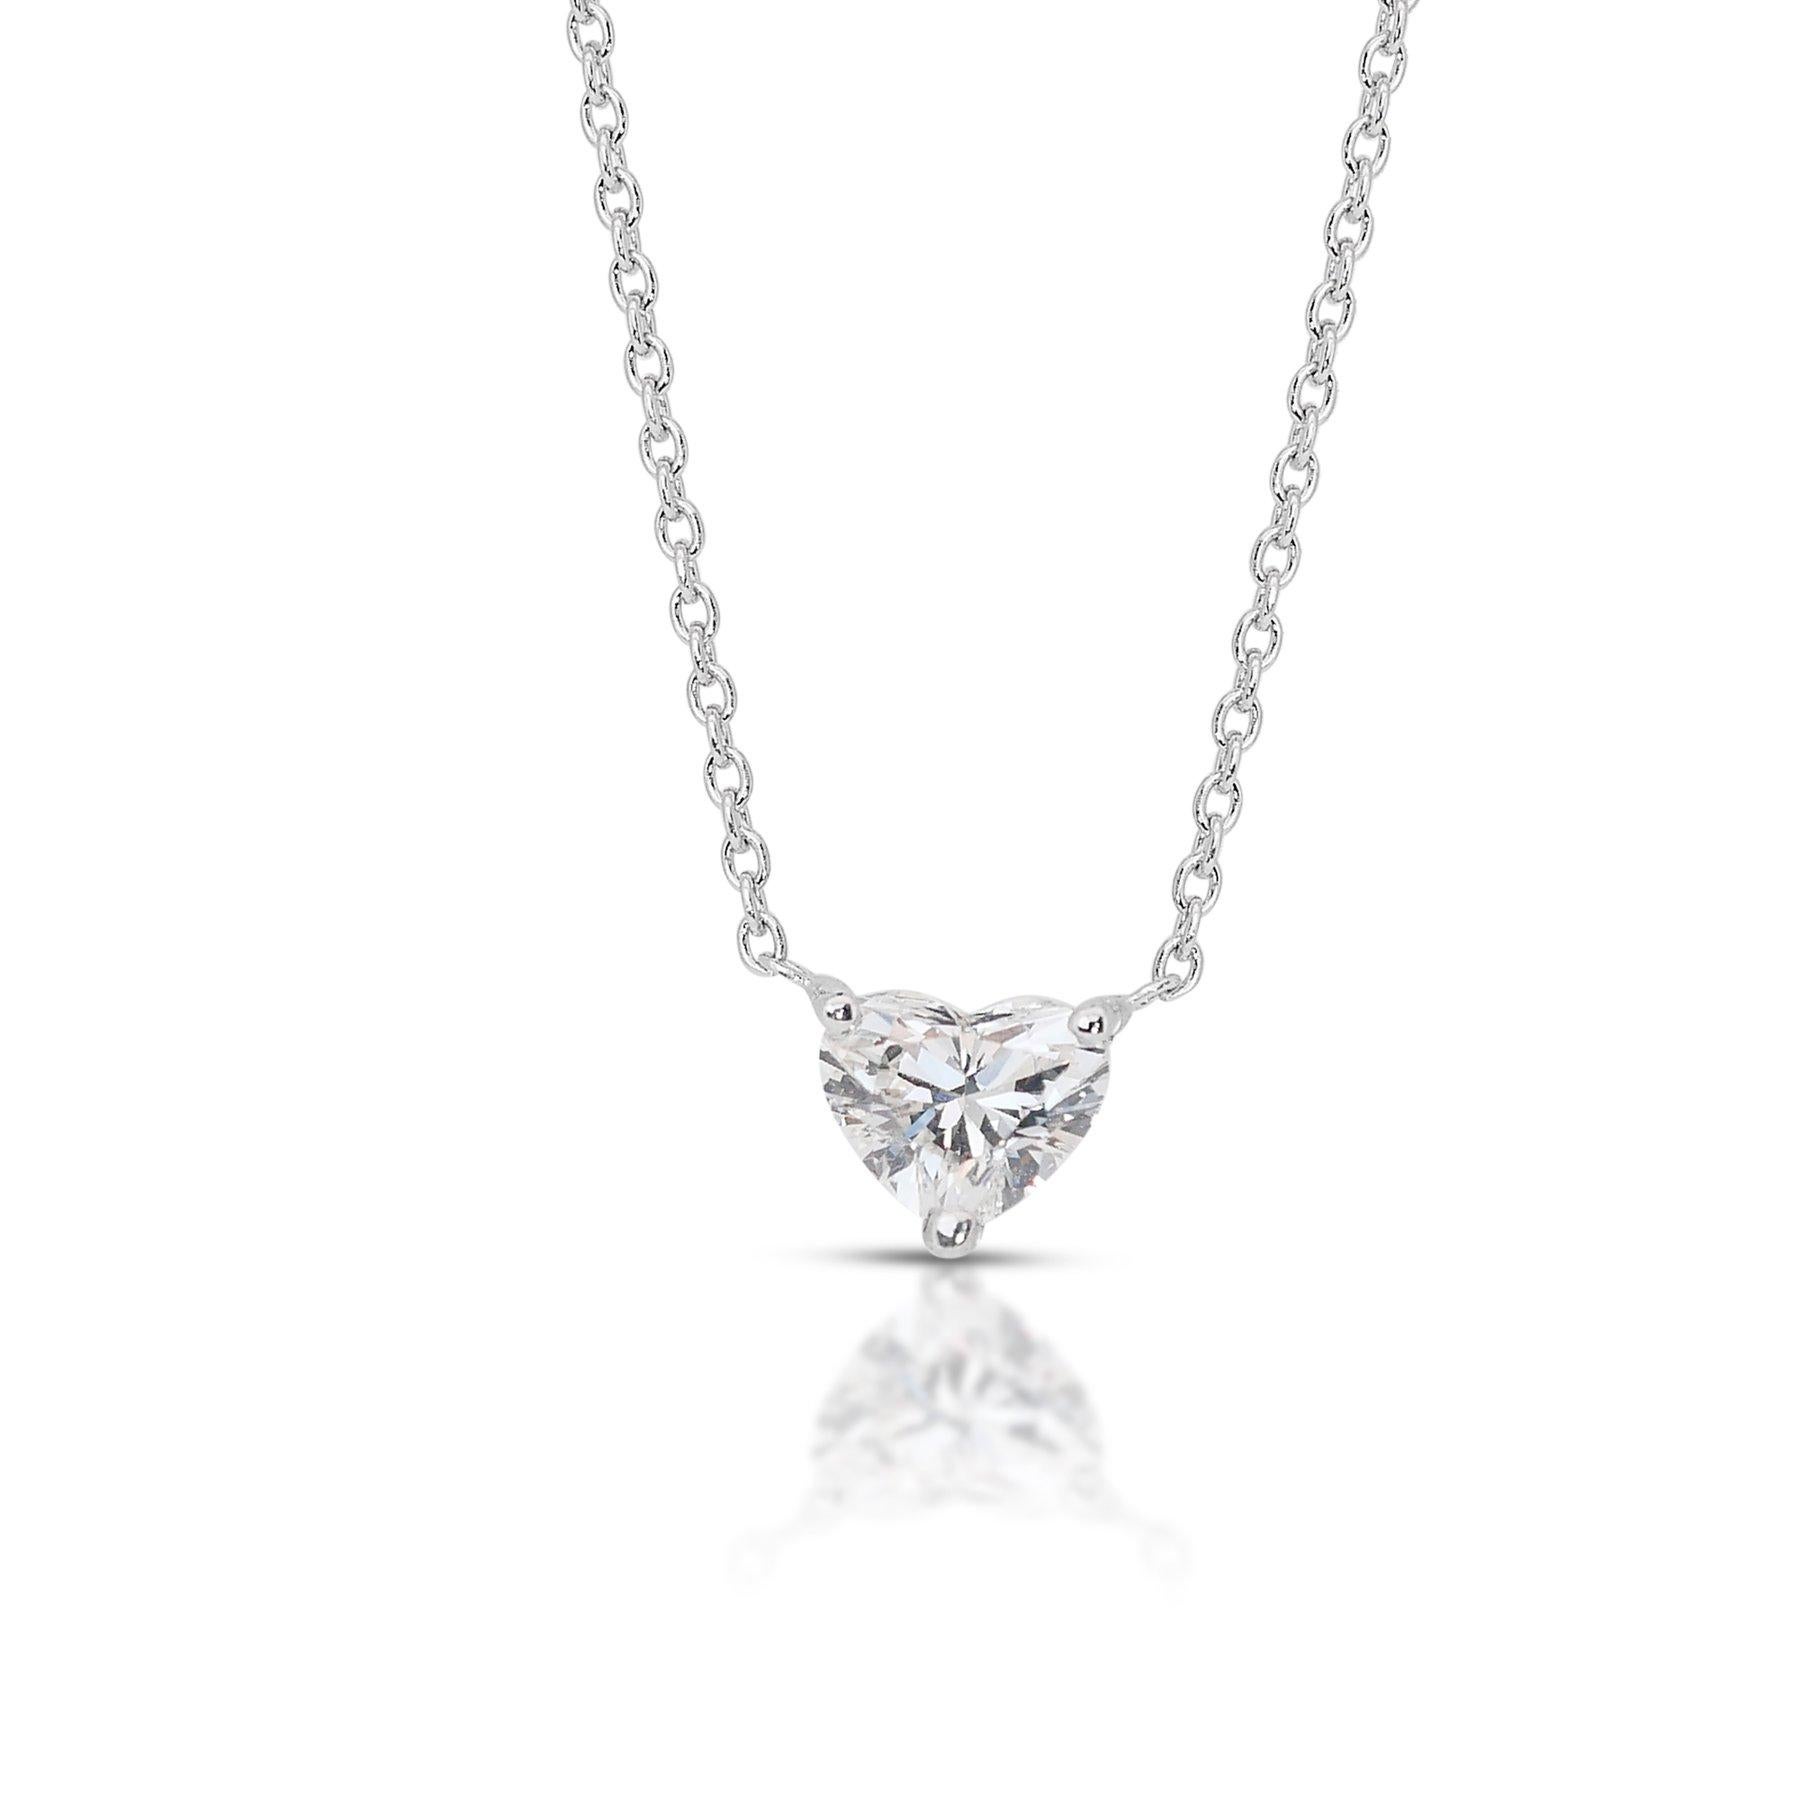 Enchanting 18k White Gold Heart-Shaped Diamond Solitaire Necklace w/0.71 ct  For Sale 2